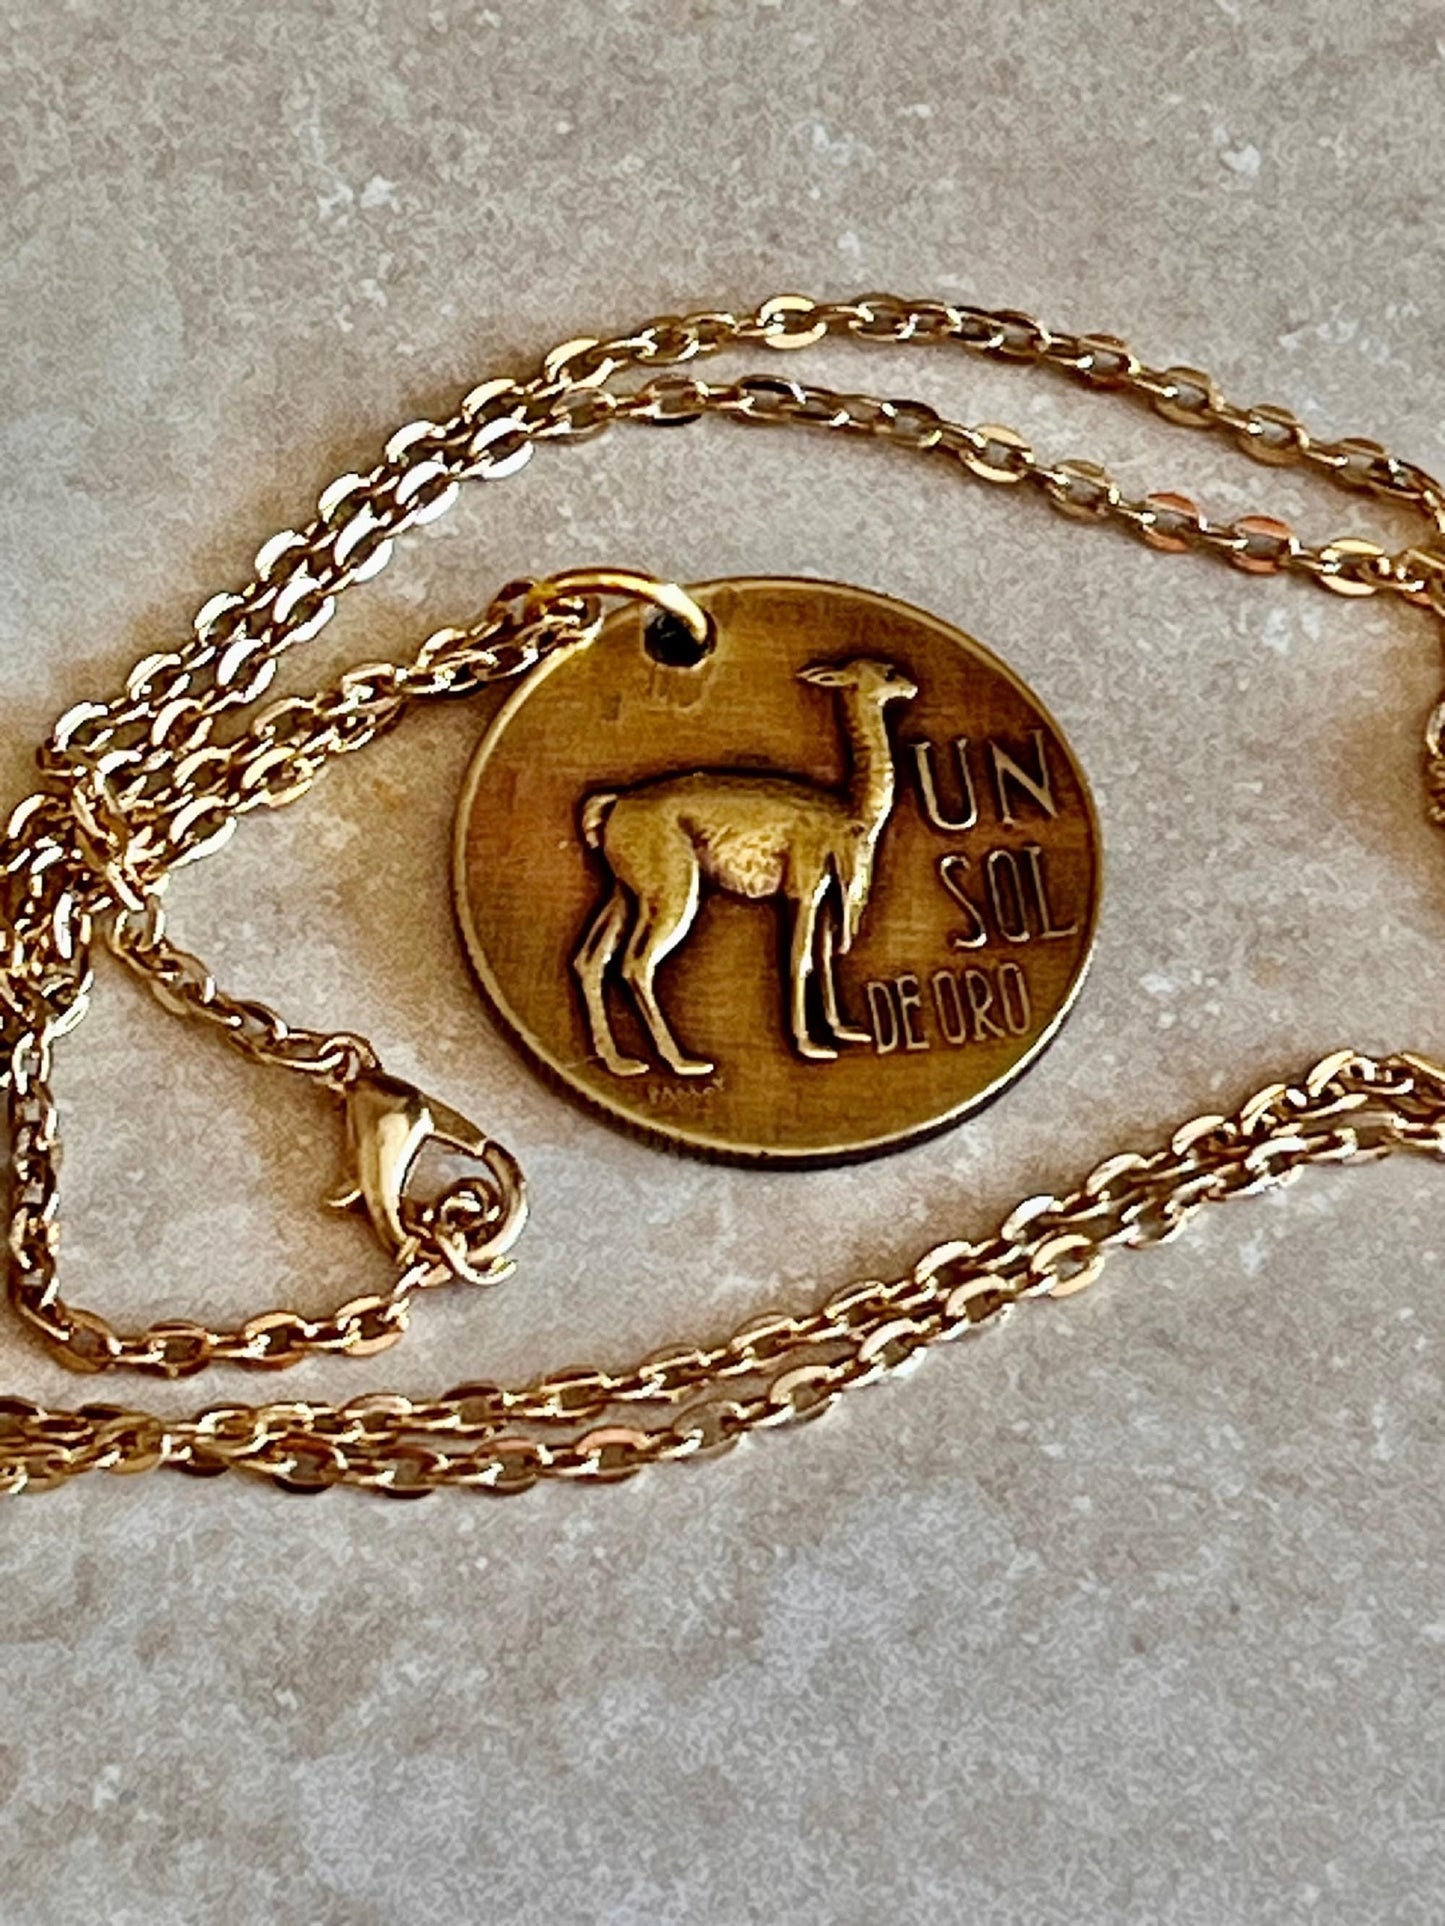 Peru Coin Pendant Peruvian UN Sol Del Personal Necklace Old Vintage Handmade Jewelry Gift Friend Charm For Him Her World Coin Collector